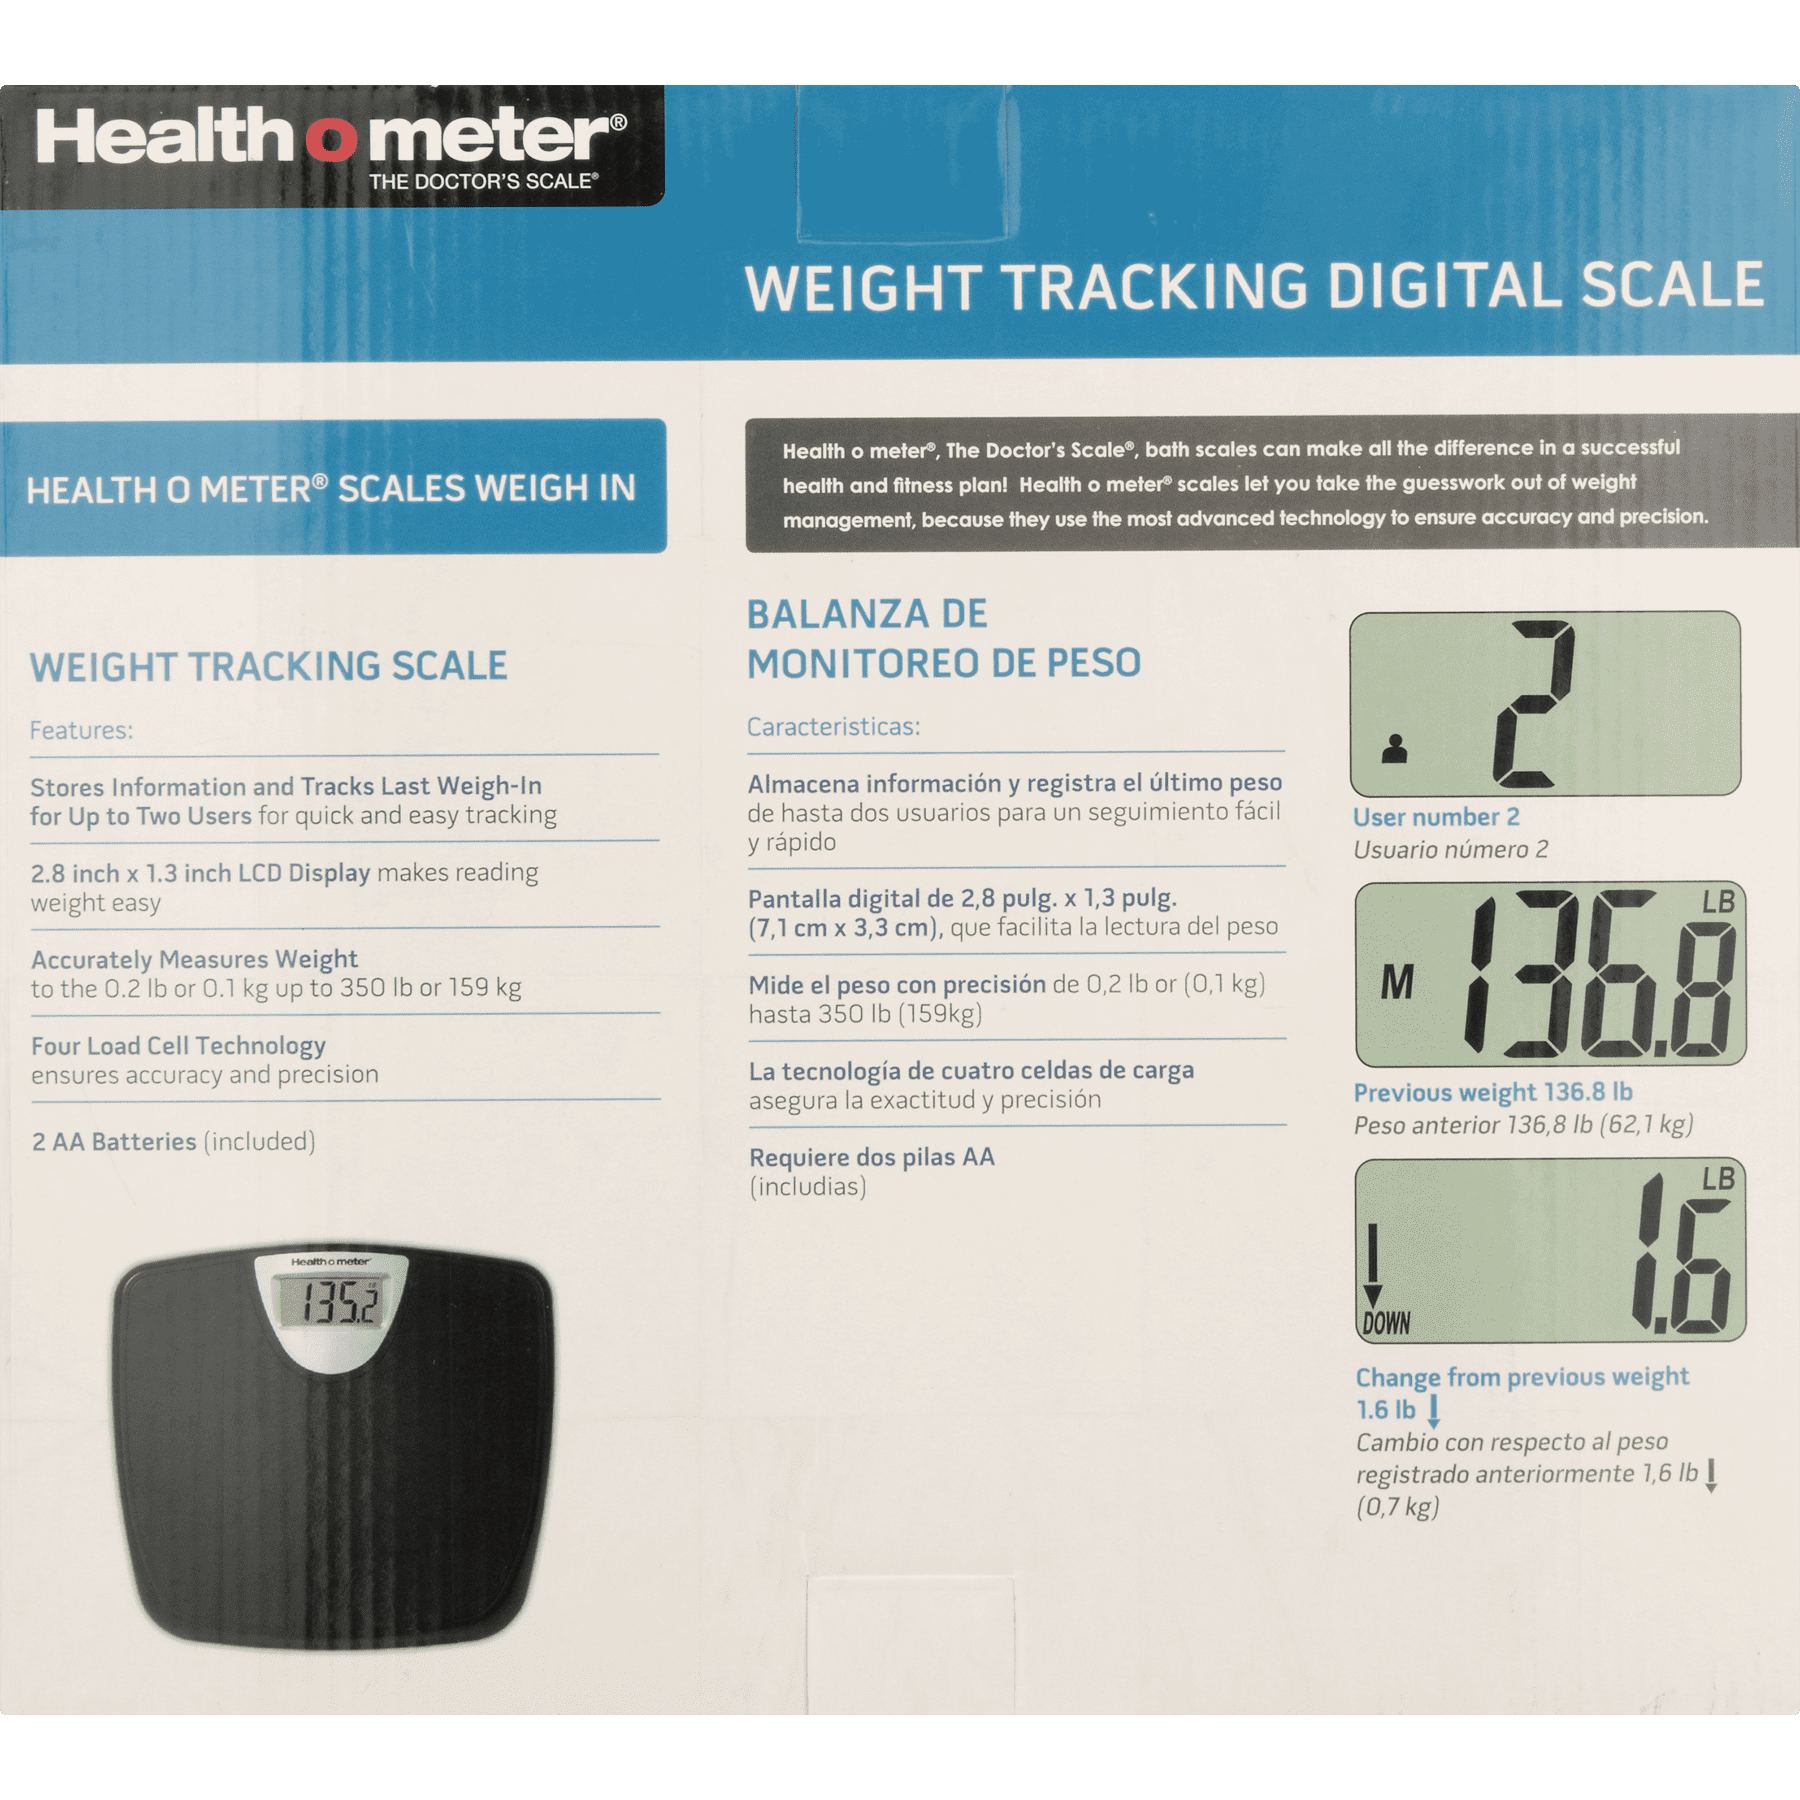 Health o Meter HDM770-05 330LB Limit Digital Weight Tracking Scale Black -  NEW